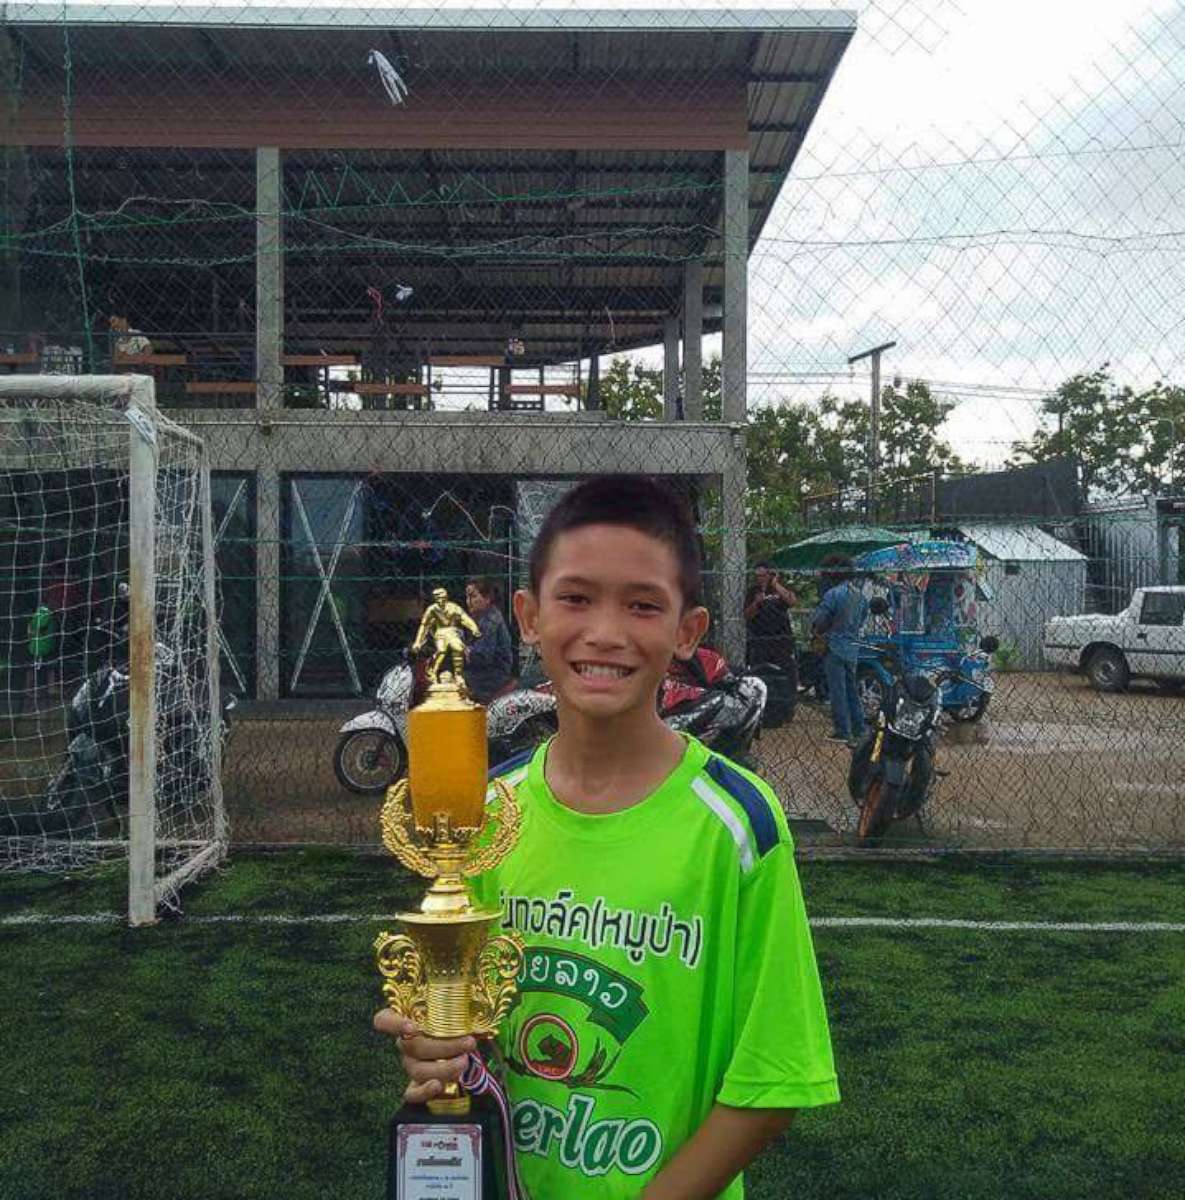 PHOTO: Monkol Boonbiam, 13, of Thai youth soccer team Wild Boars is pictured in this undated Facebook photo.